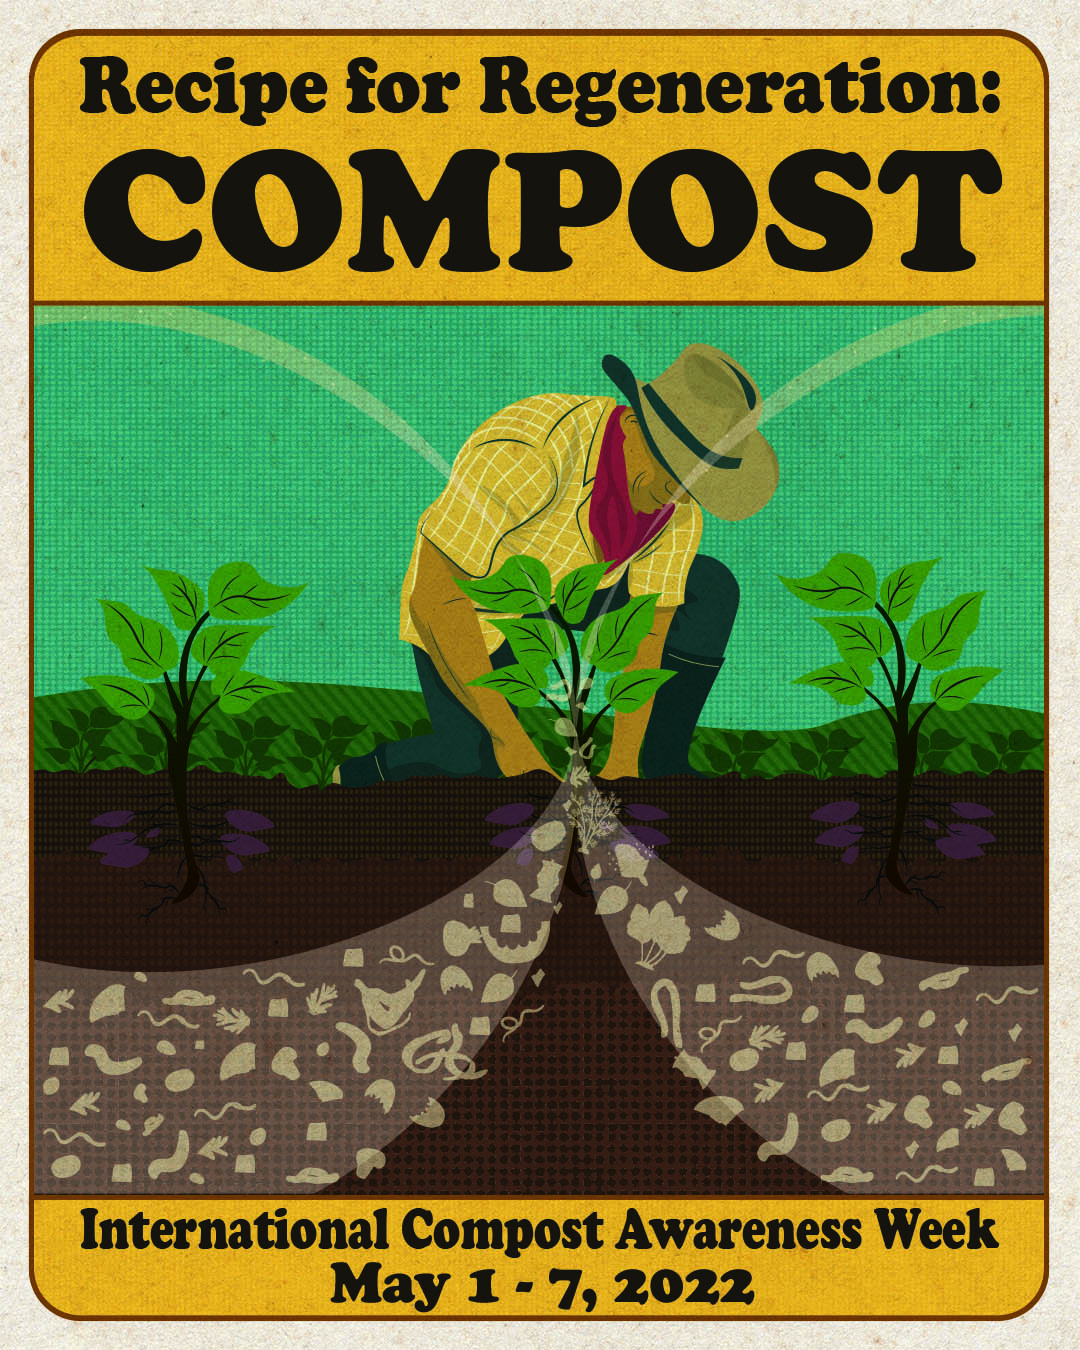 Compost Awareness Week Declared in Illinois, May 1-7